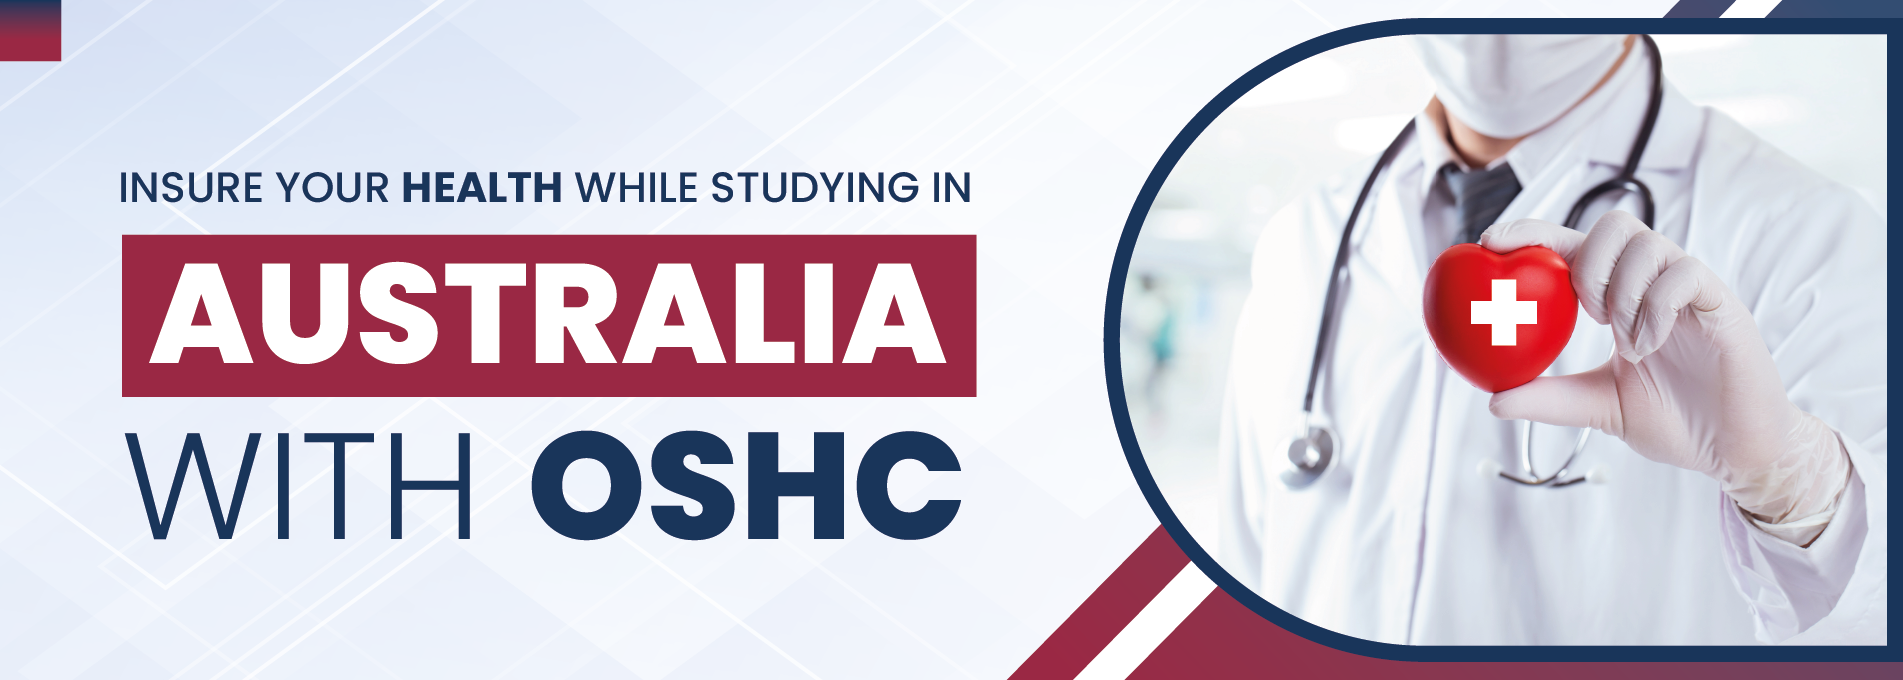 Insure Your Health while Studying In Australia with OSHC